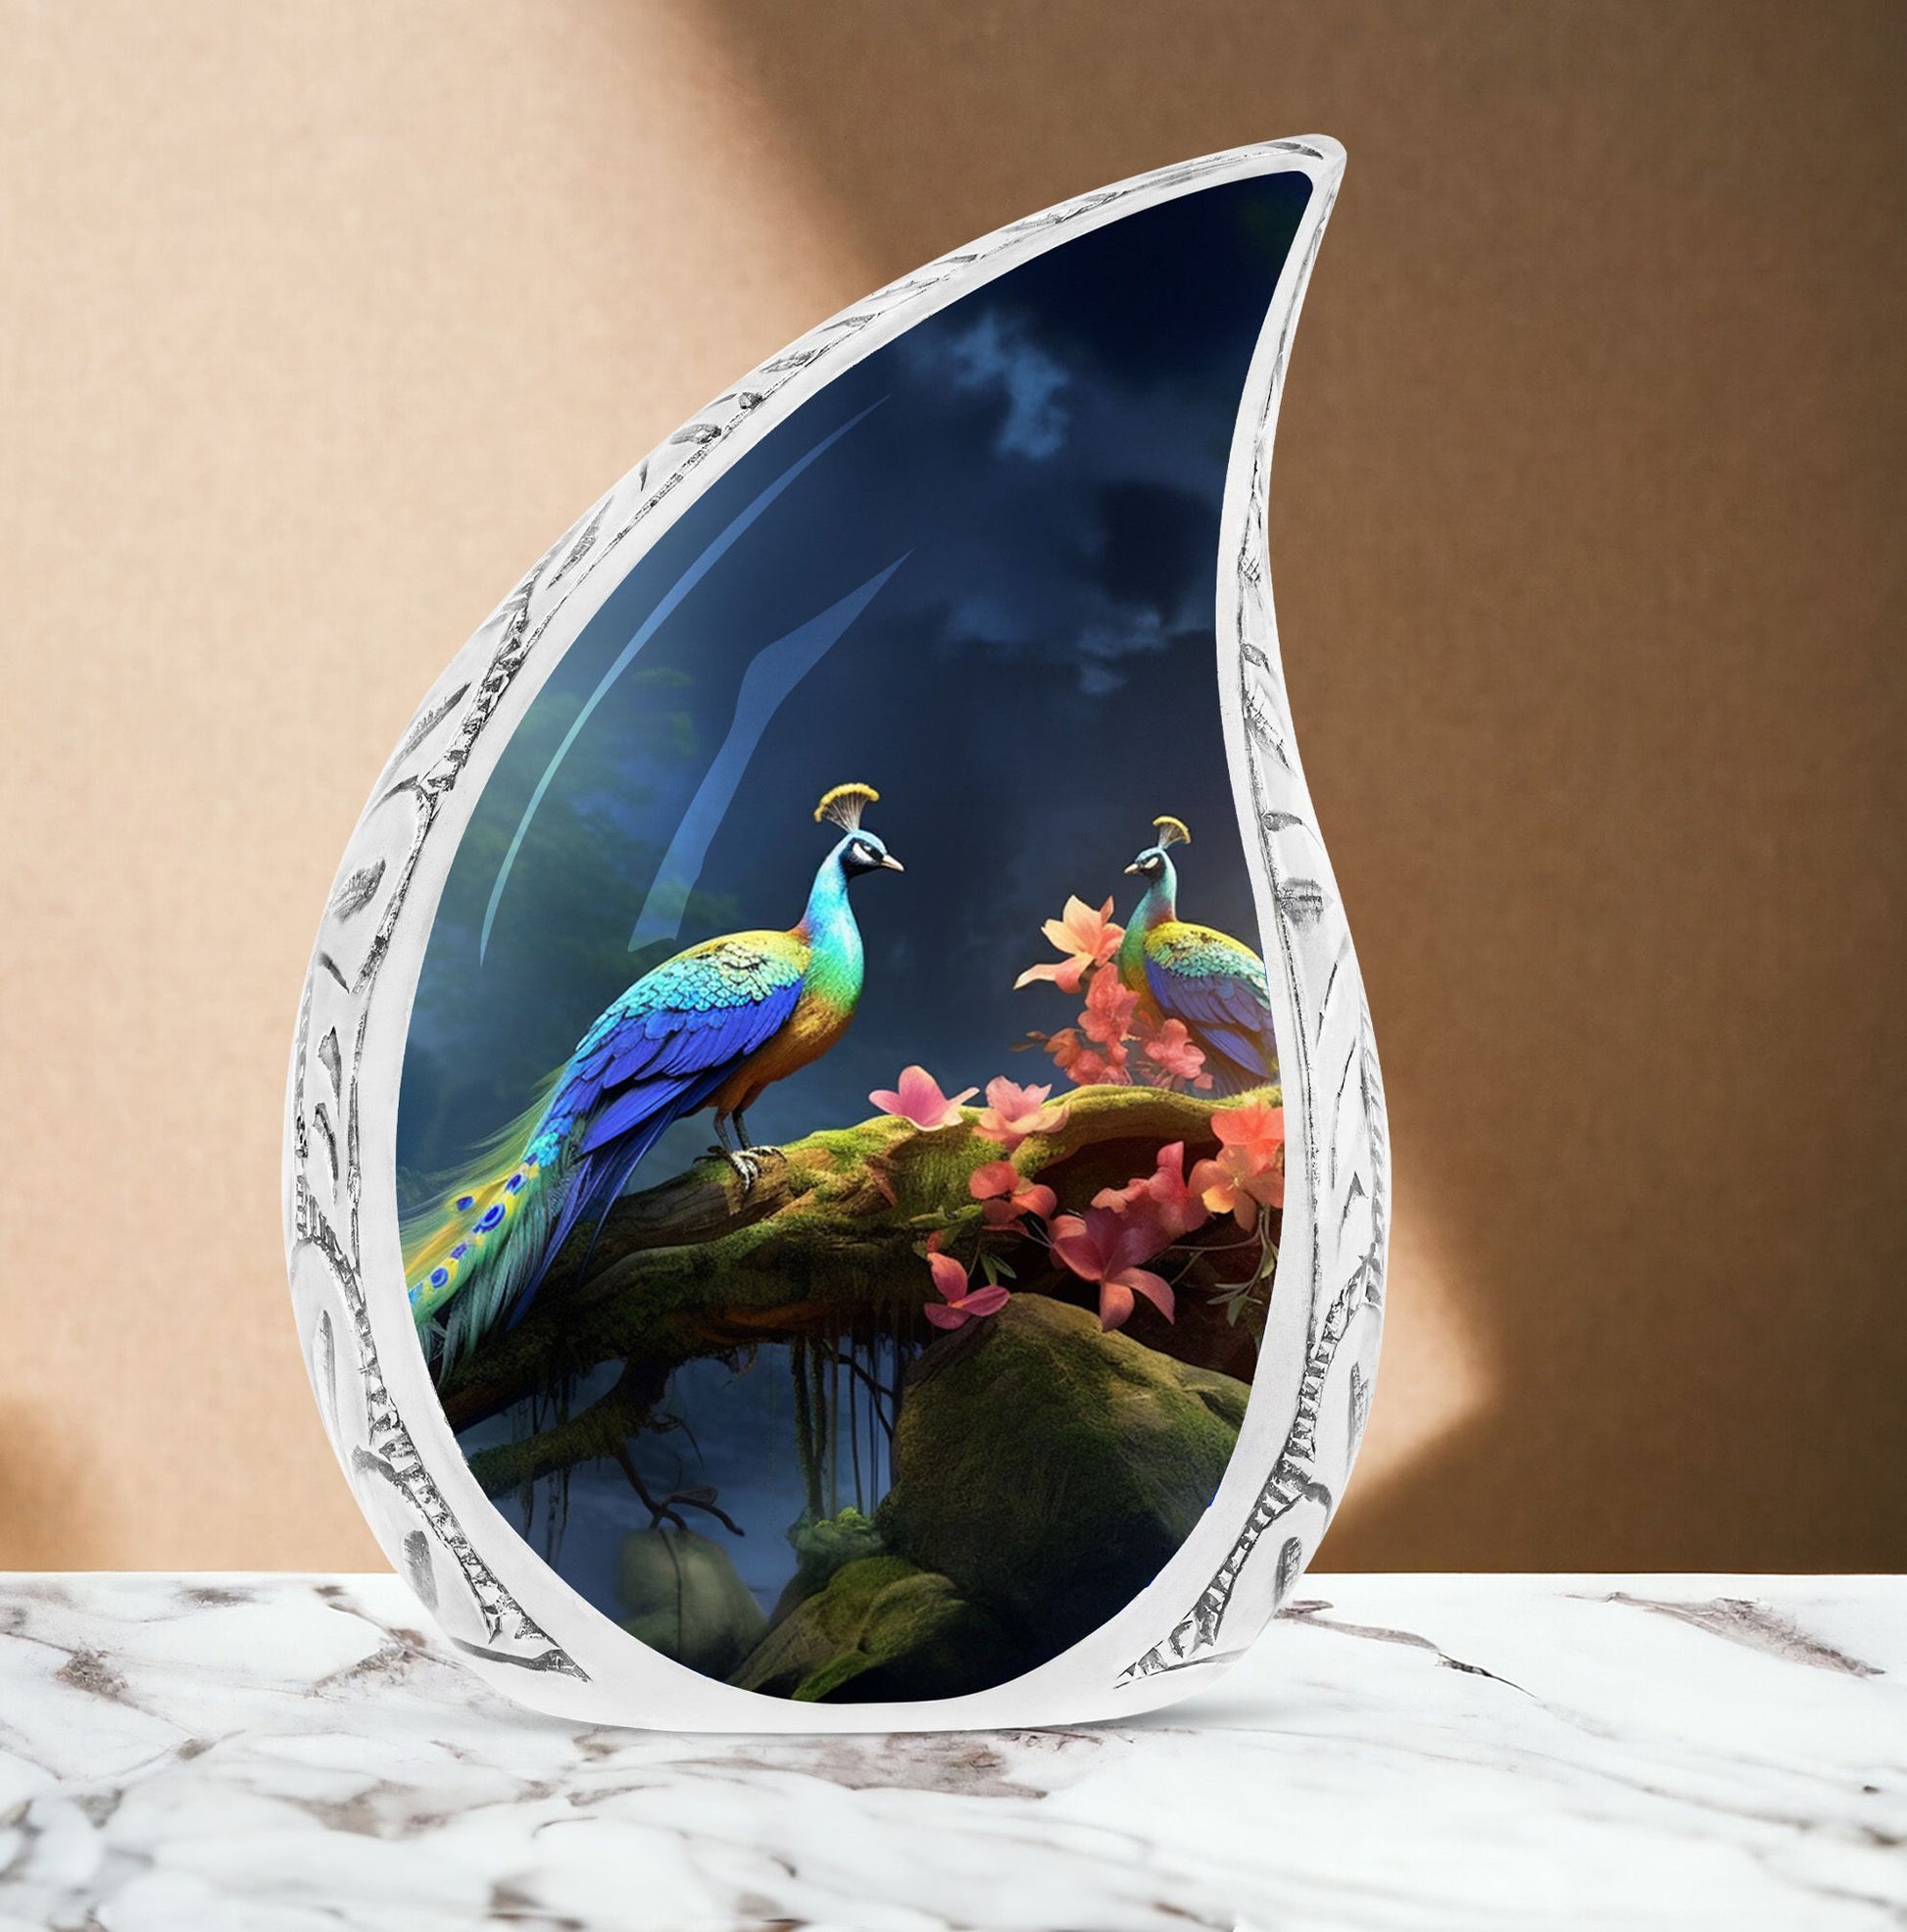 Large Peacock themed urn for ashes, suitable for women and burial in ground, representing the face-off motif in nature.